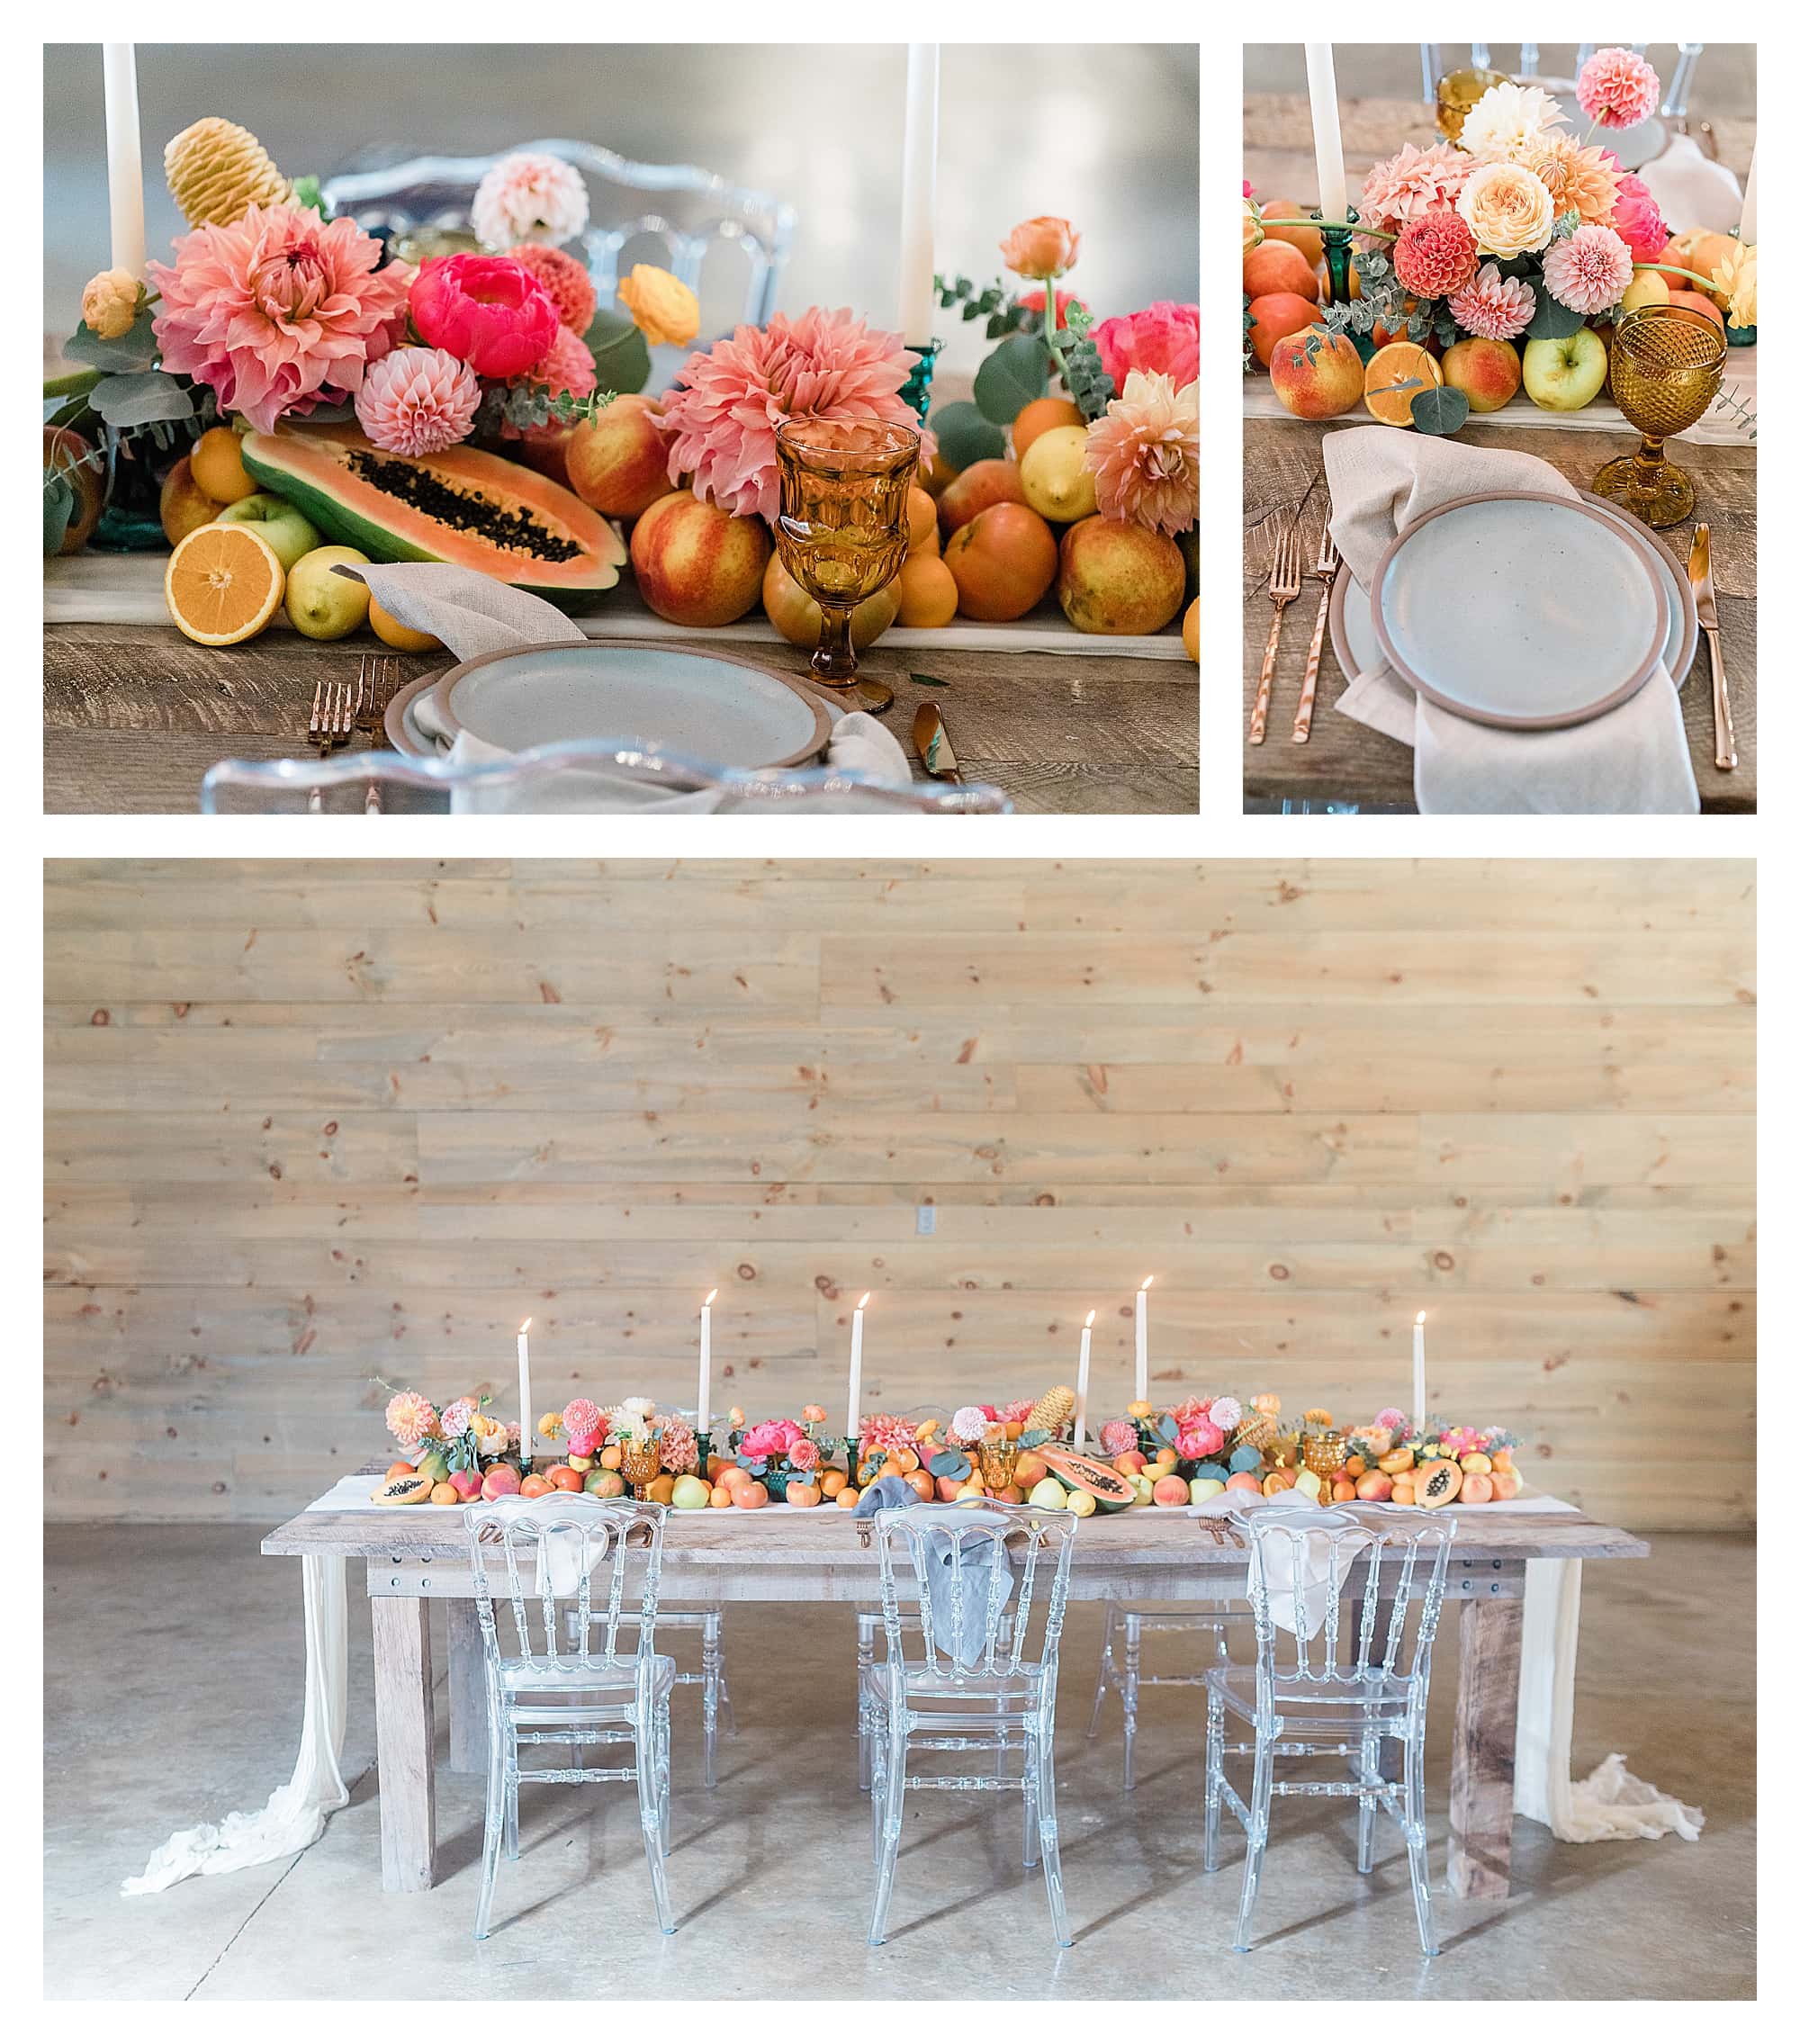 Rustic wooden table and clear plastic chairs with peach, pink and yellow citrus fruits as centrepiece down center of table with white candles